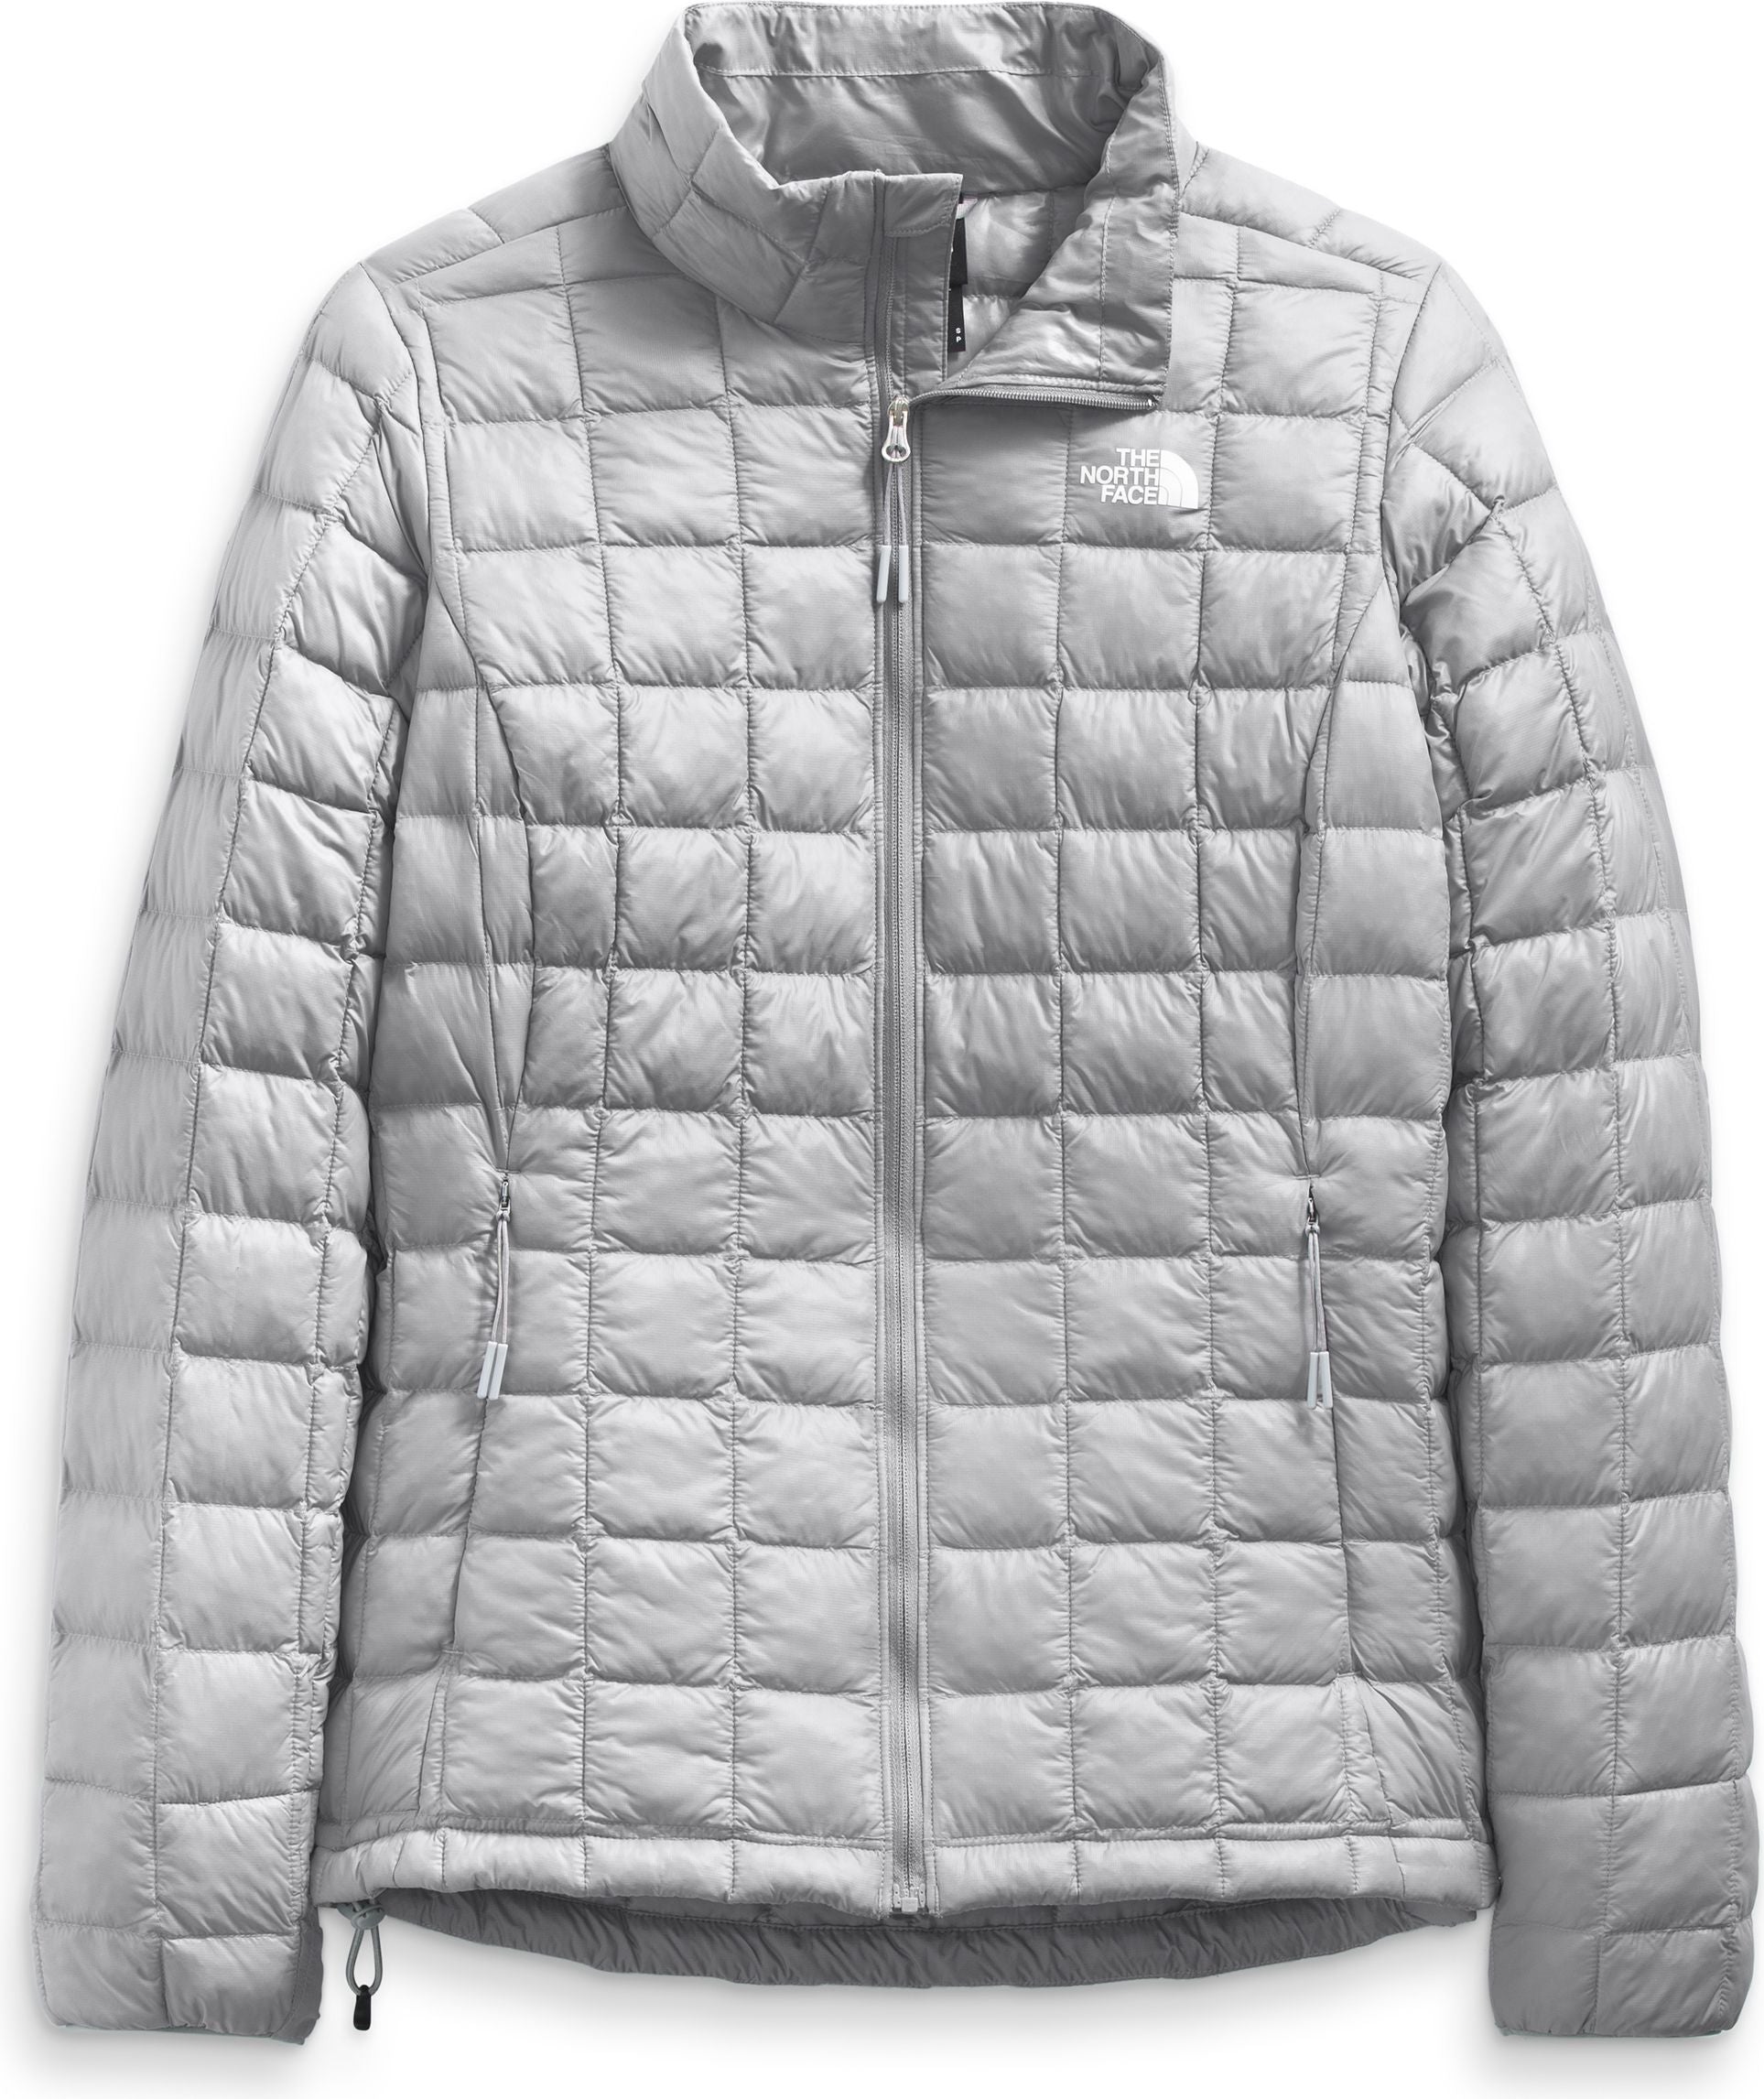 Women's Thermoball Eco Jacket 2.0 Meld Grey